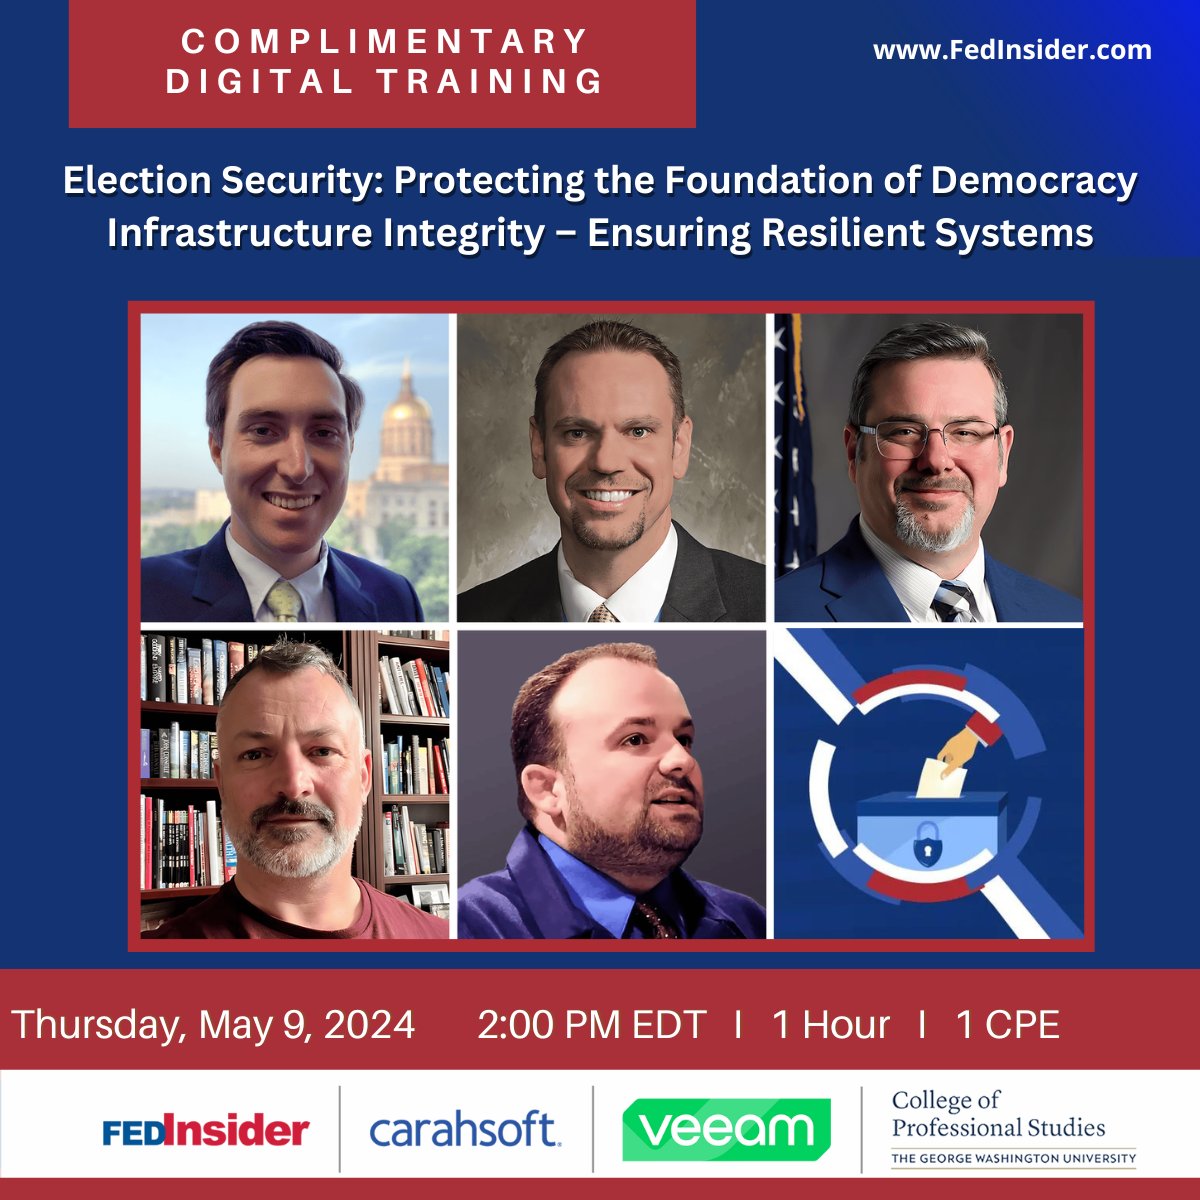 Election administration and support is critical infrastructure. On May 9, join @EACgov Vice Chair Palmer, @FedInsider, @Veeam, @GaSecofState, and @PAStateDept in outlining steps officials can take to protect election infrastructure. Register here: tinyurl.com/3vbvk32a